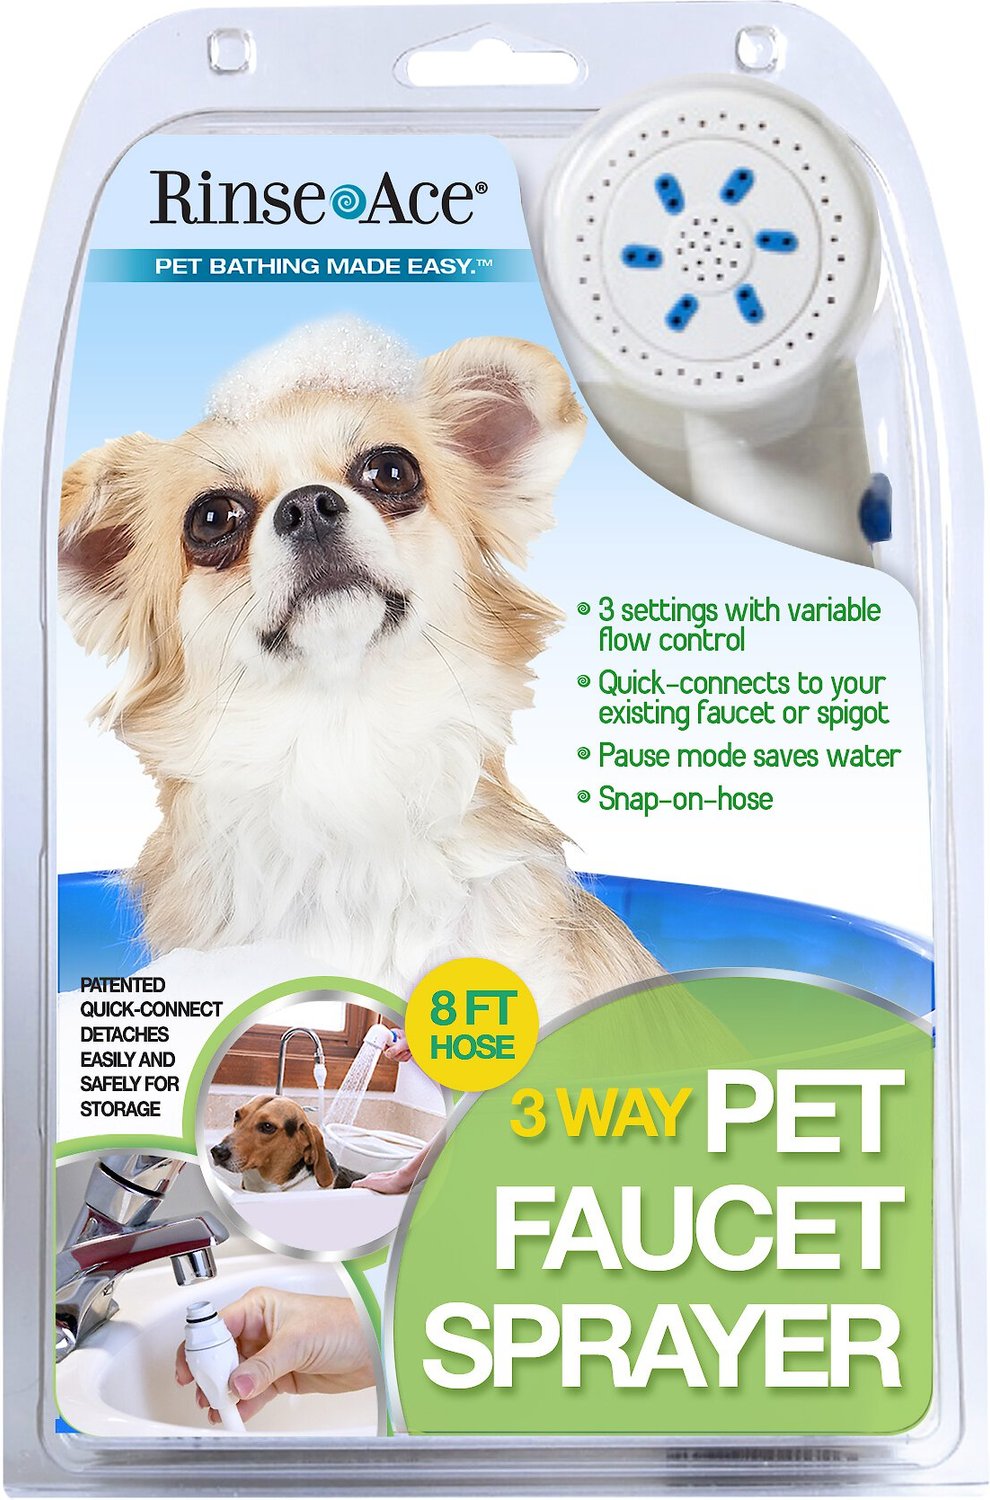 Faucet Sprayer Dog Grooming Tool, Bathtub Attachment For Dogs